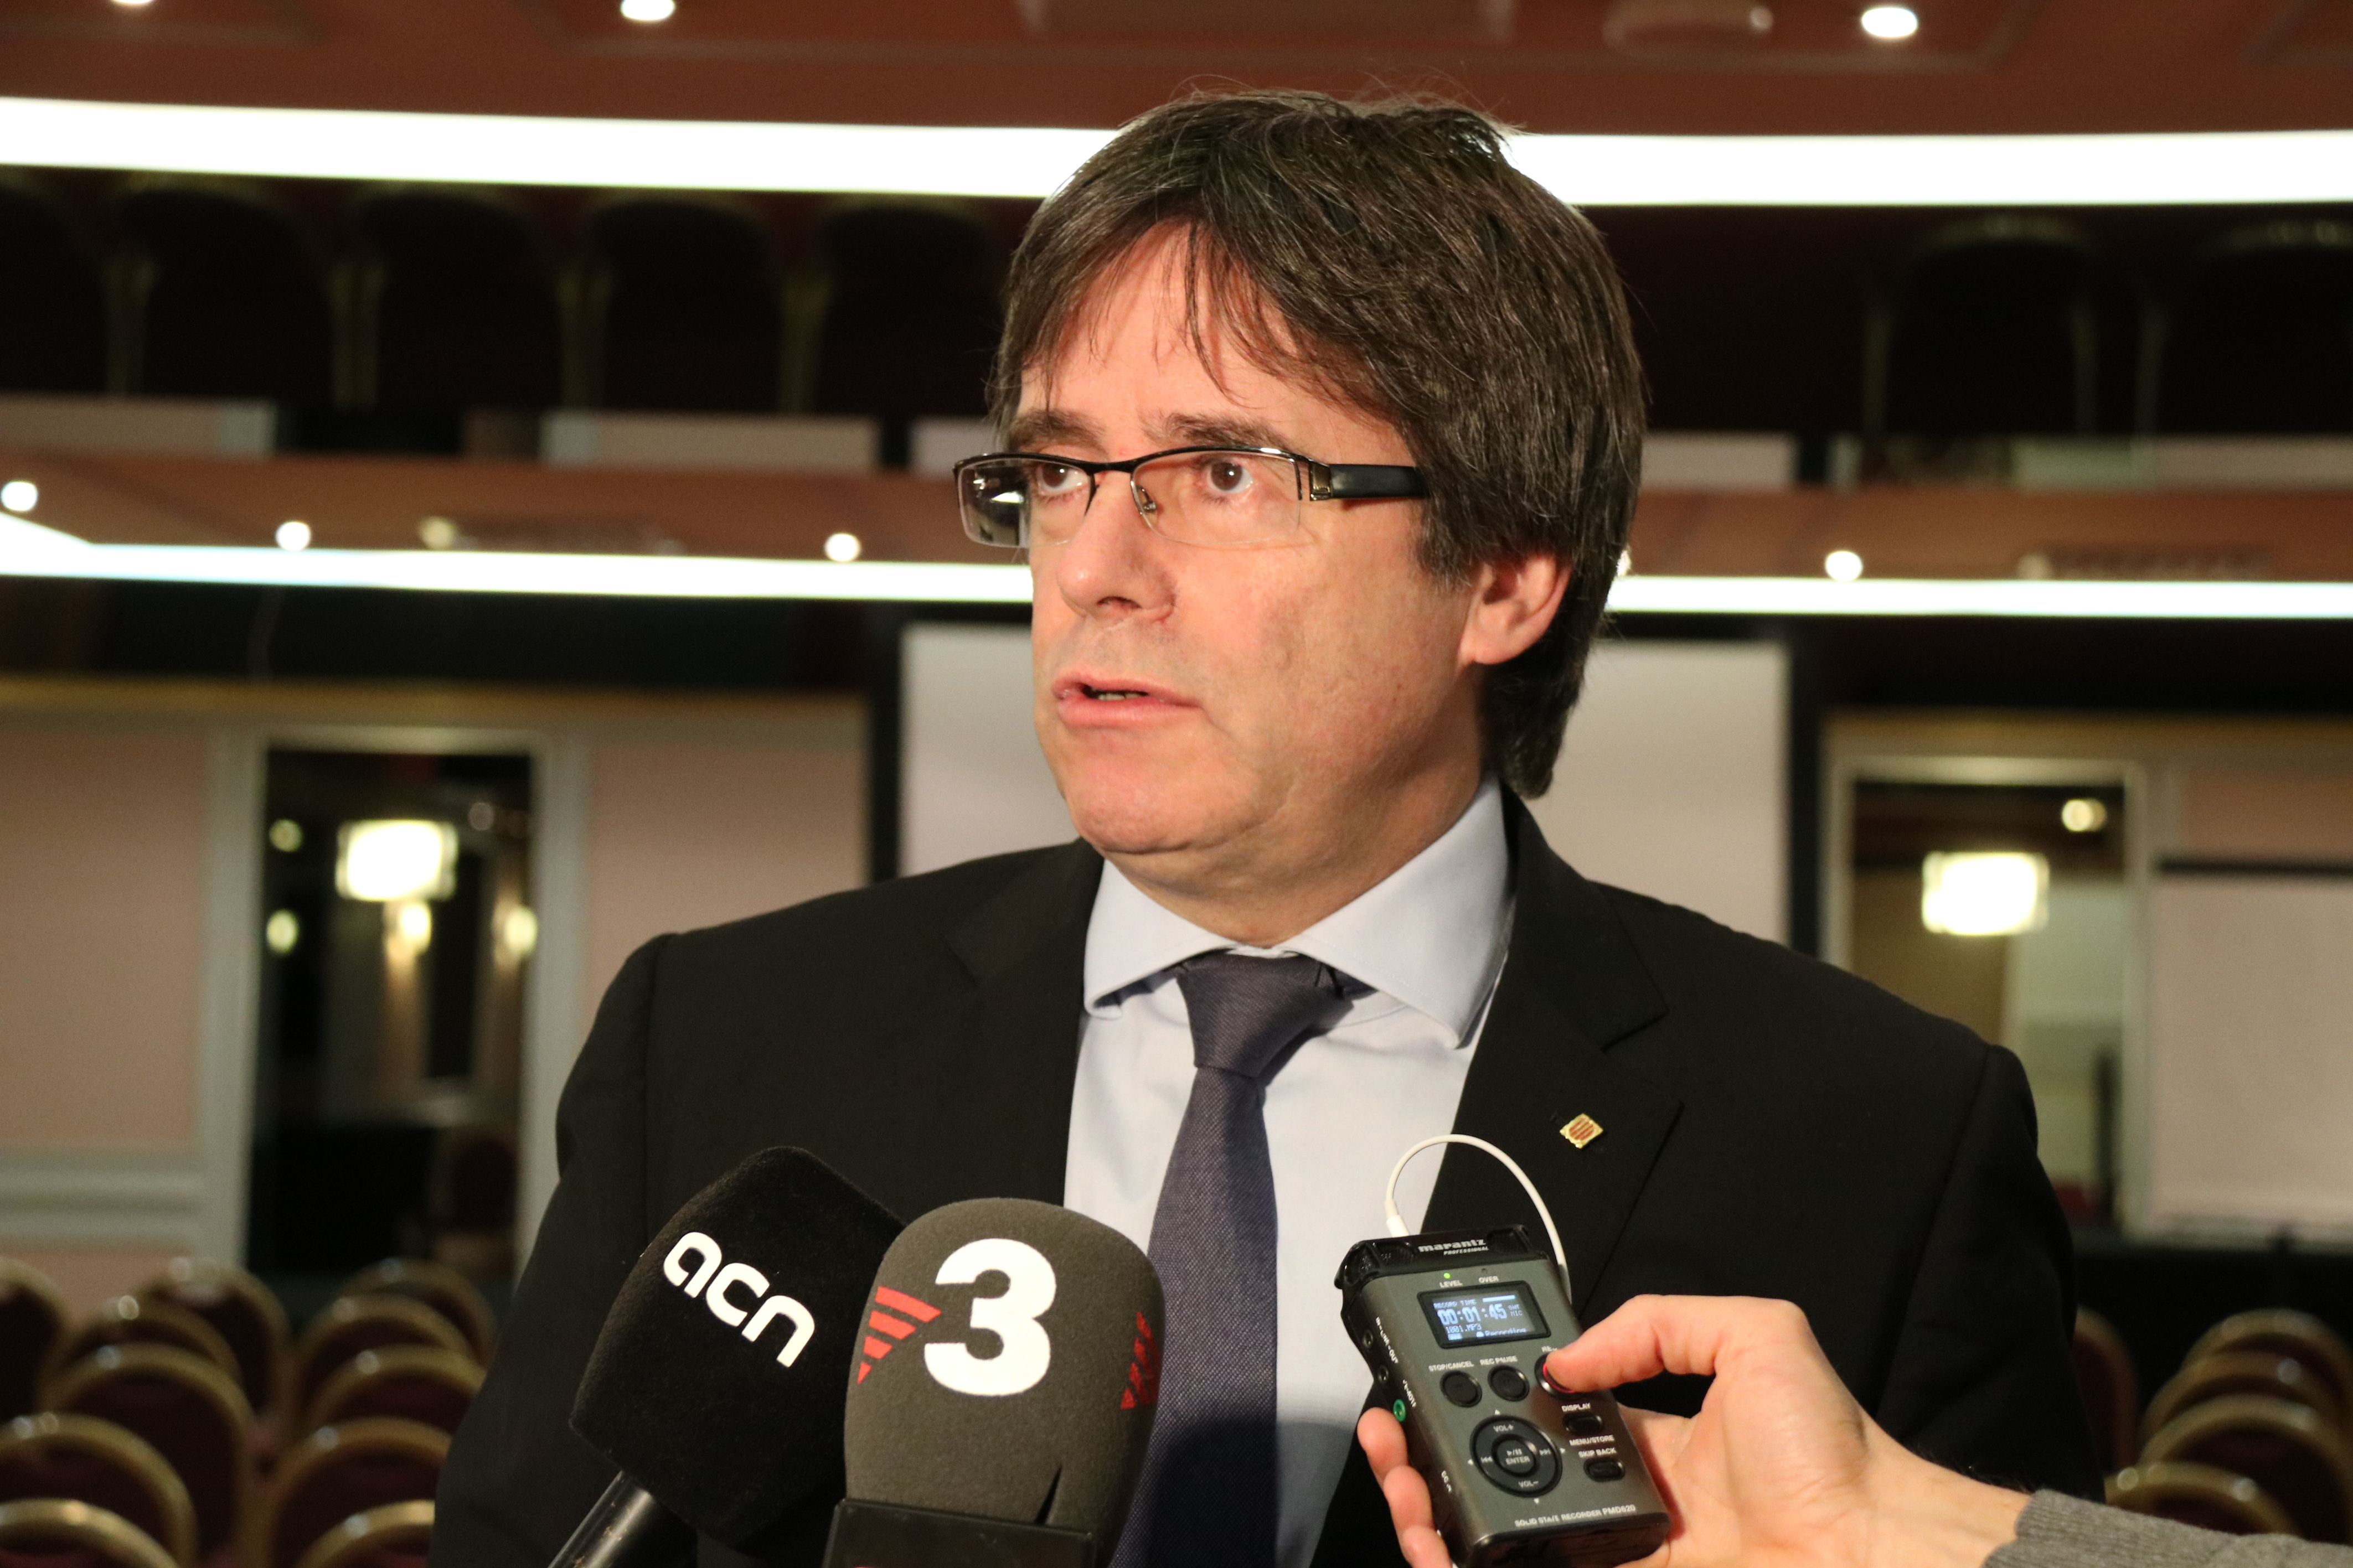 Carles Puigdemont speaking to the press in Brussels on November 29 2017 (by Laura Pous)